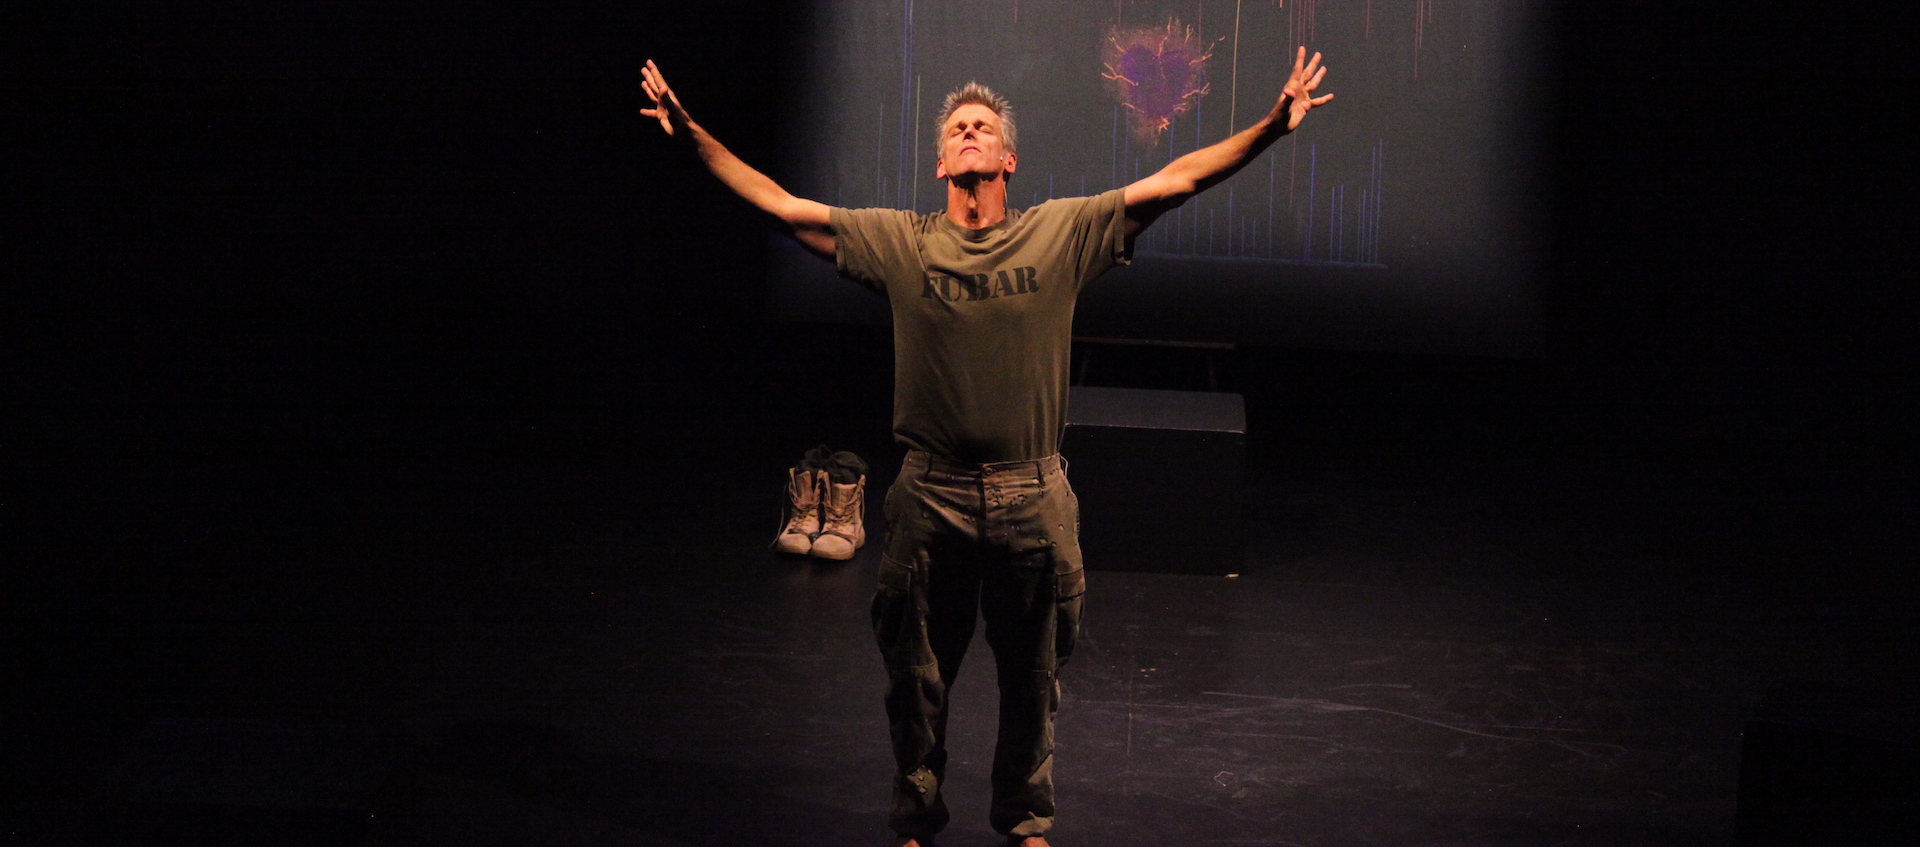 A man in army fatigues stands on a stage with his head back and his arms extended outward.